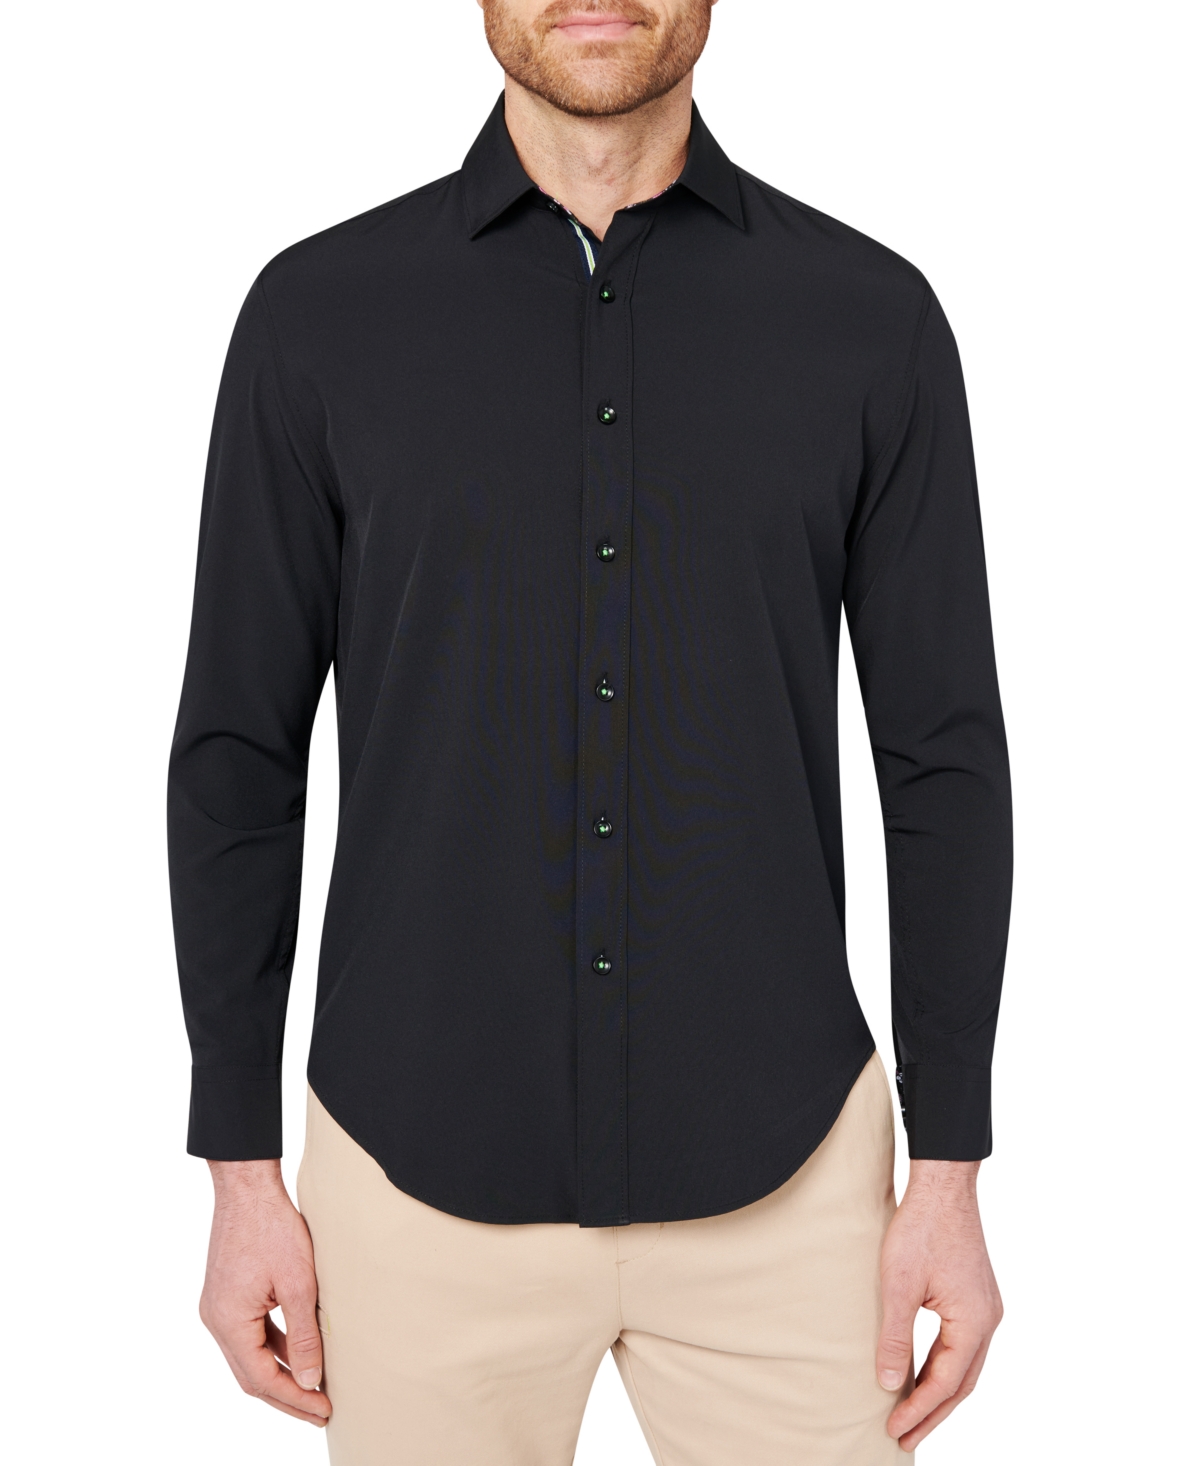 Men's Slim Fit Non-Iron Solid Performance Stretch Button-Down Shirt - Black